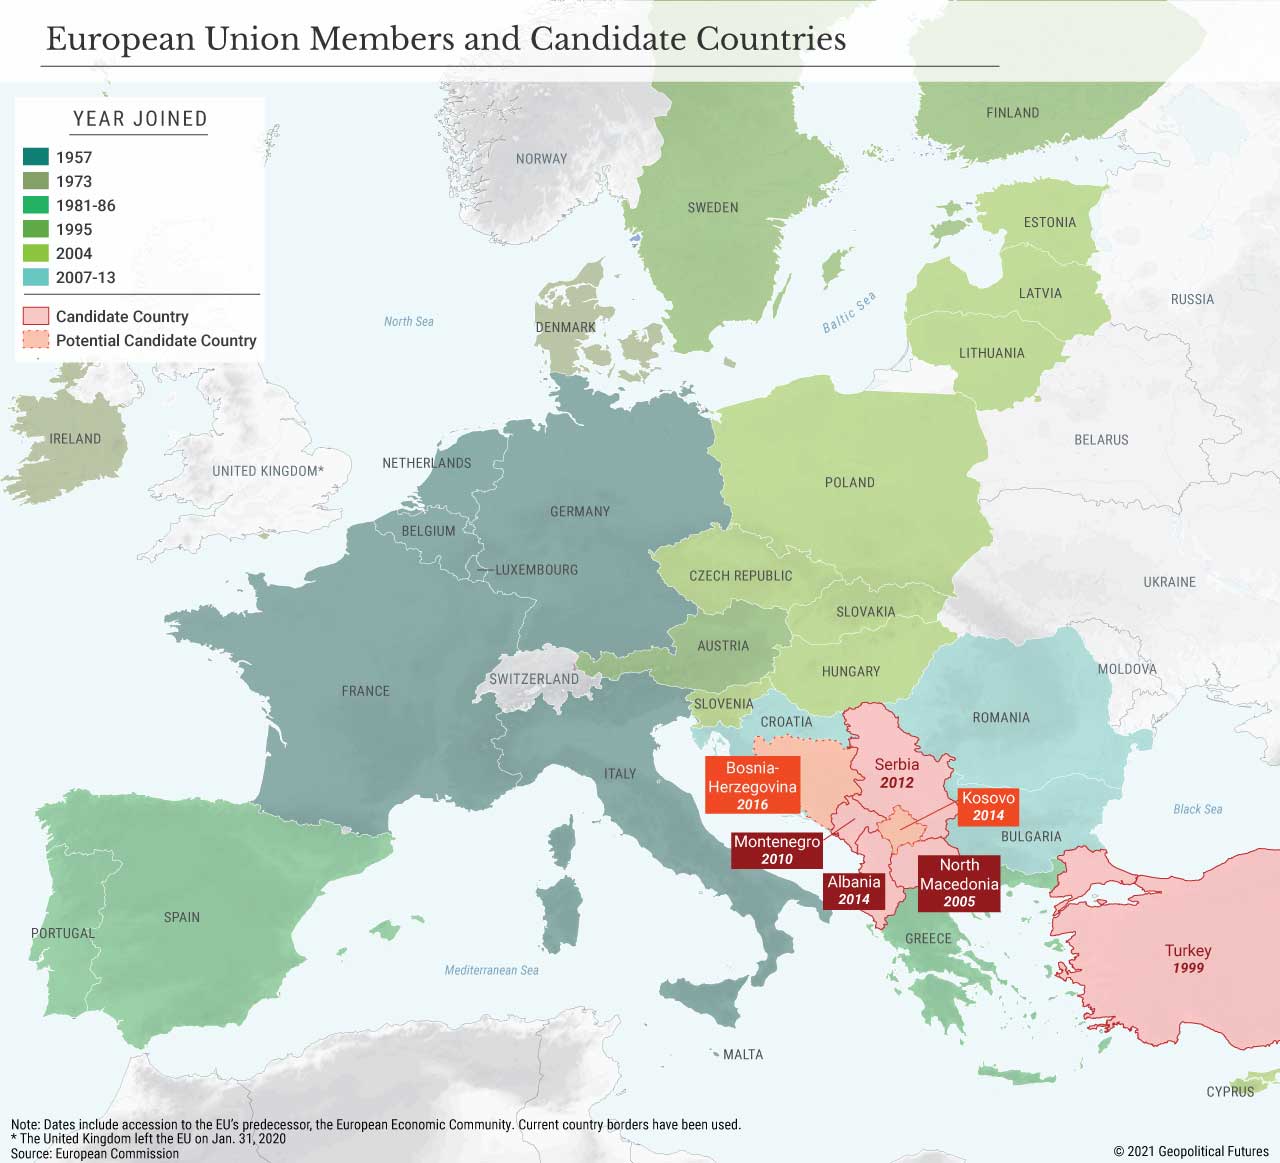 European Union Members and Candidate Countries